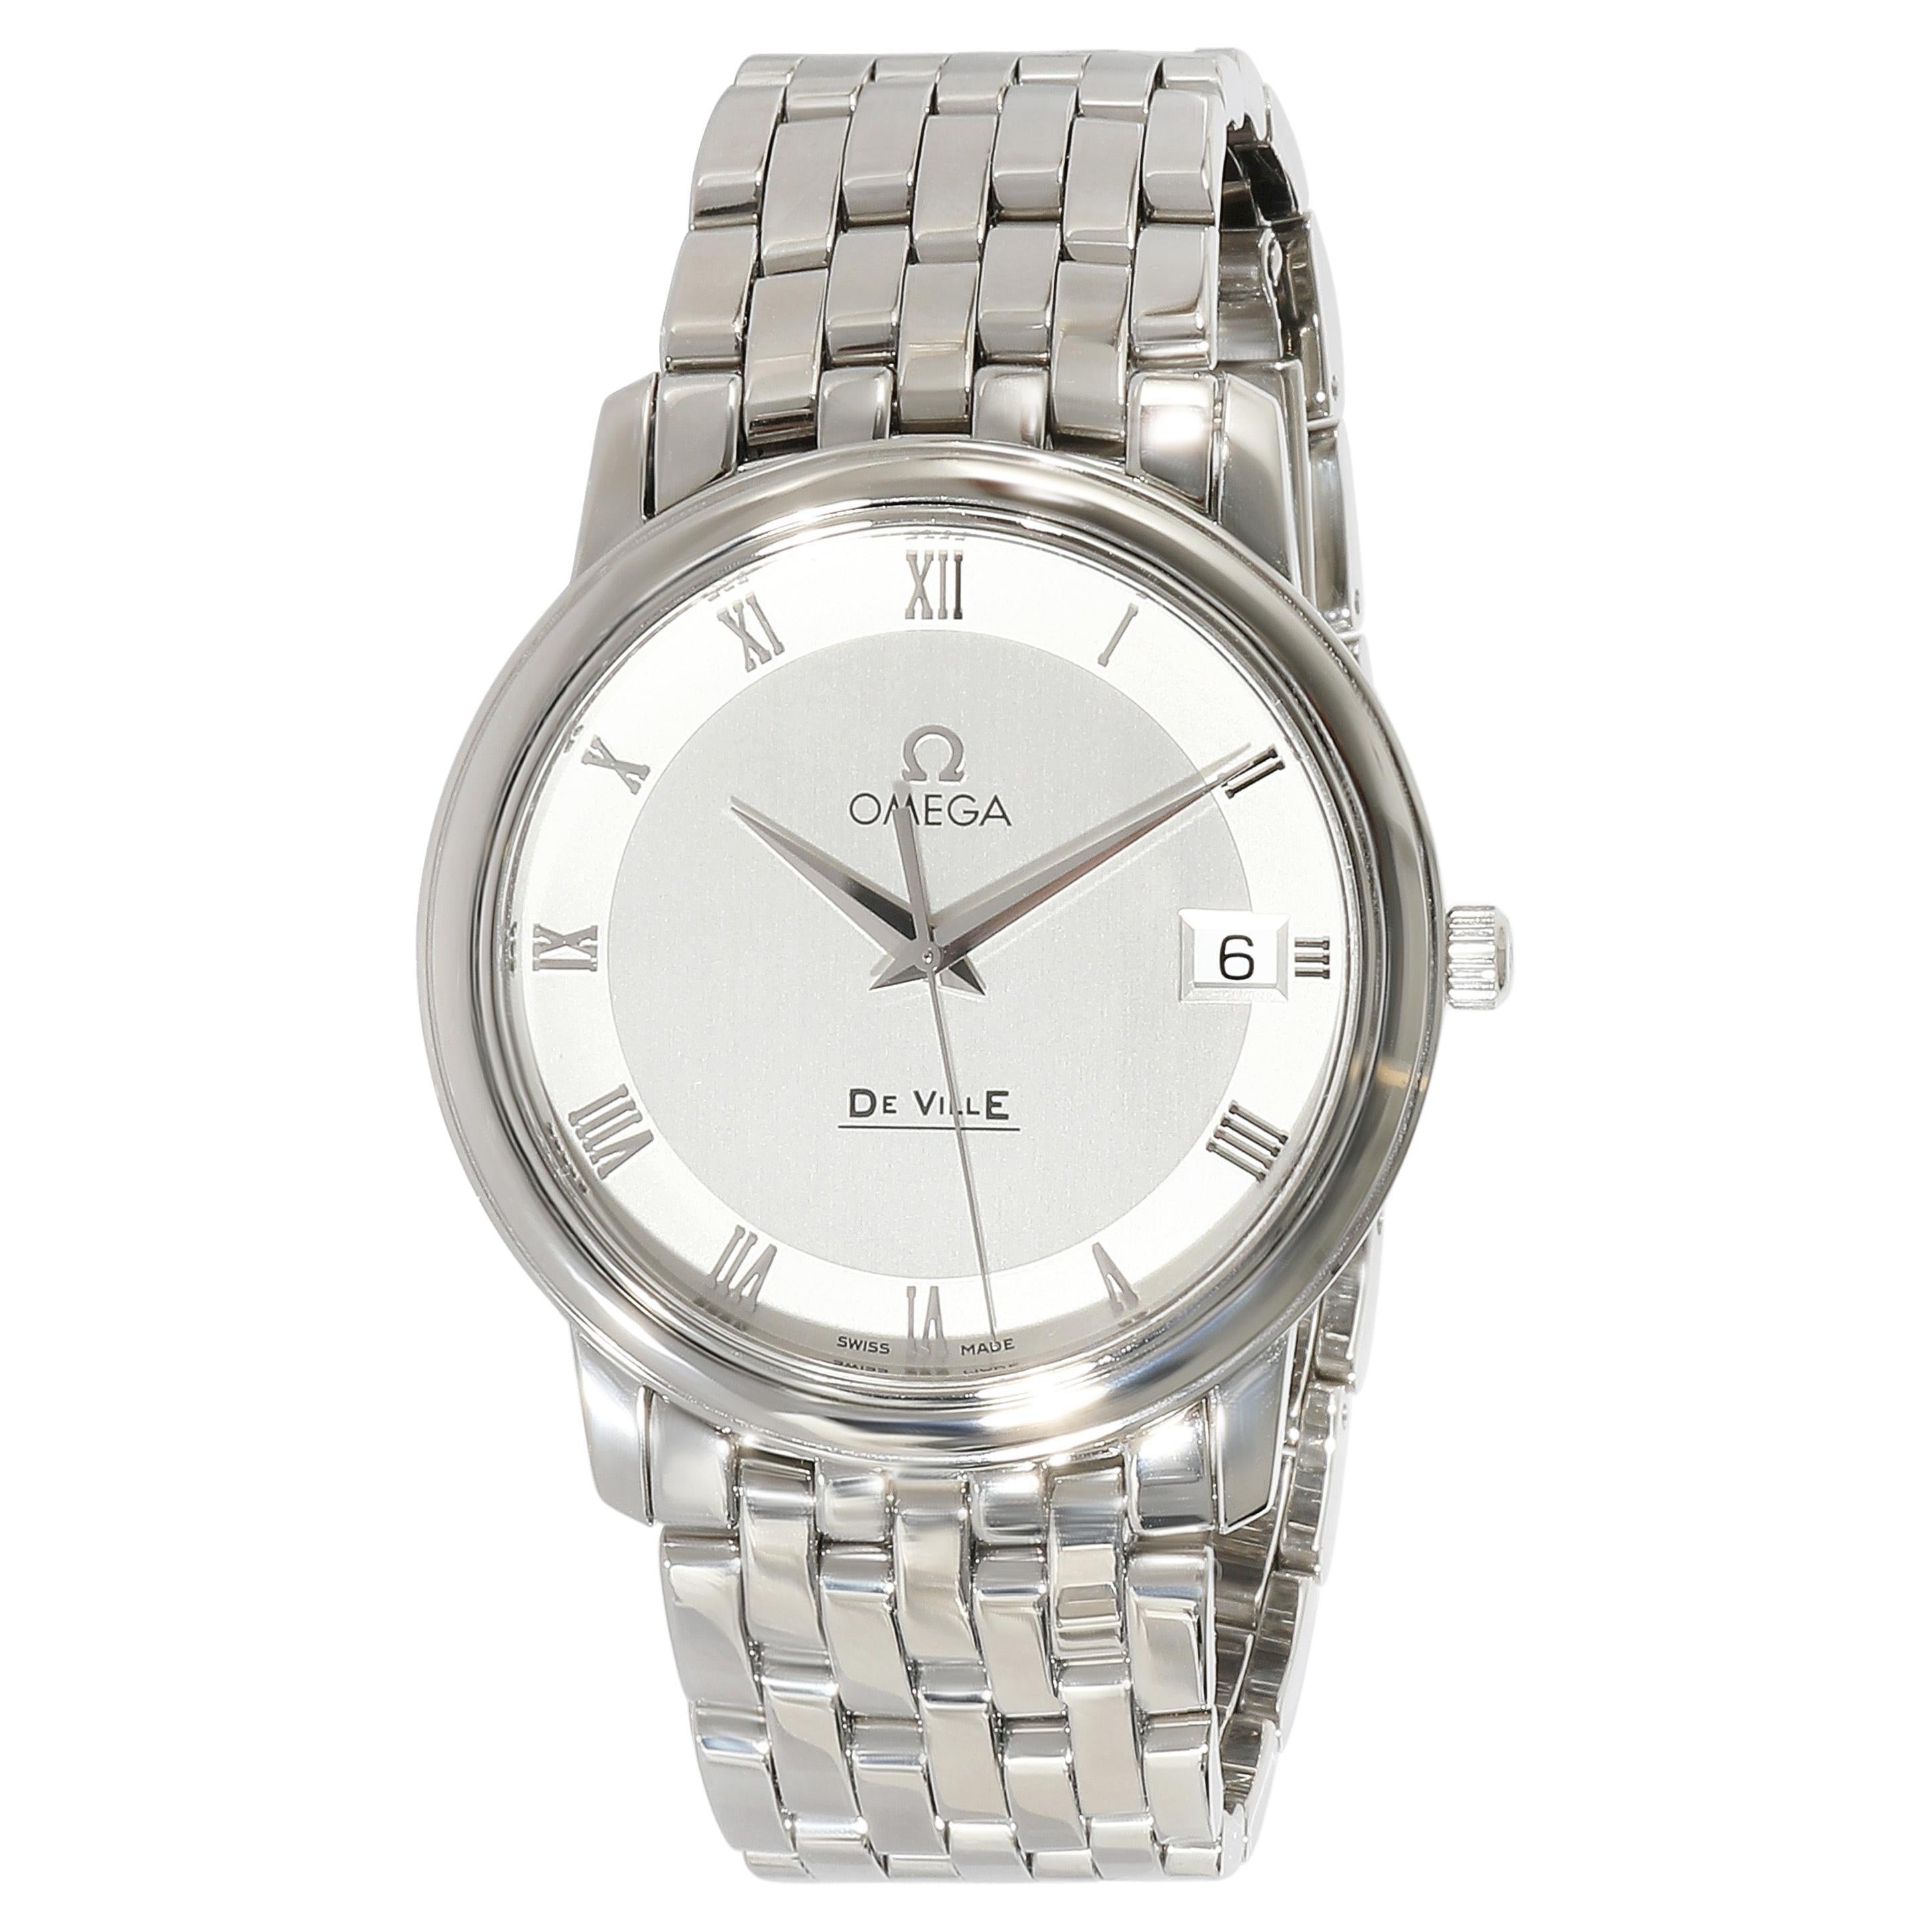 Omega DeVille 4510.33 Unisex Watch in  Stainless Steel For Sale